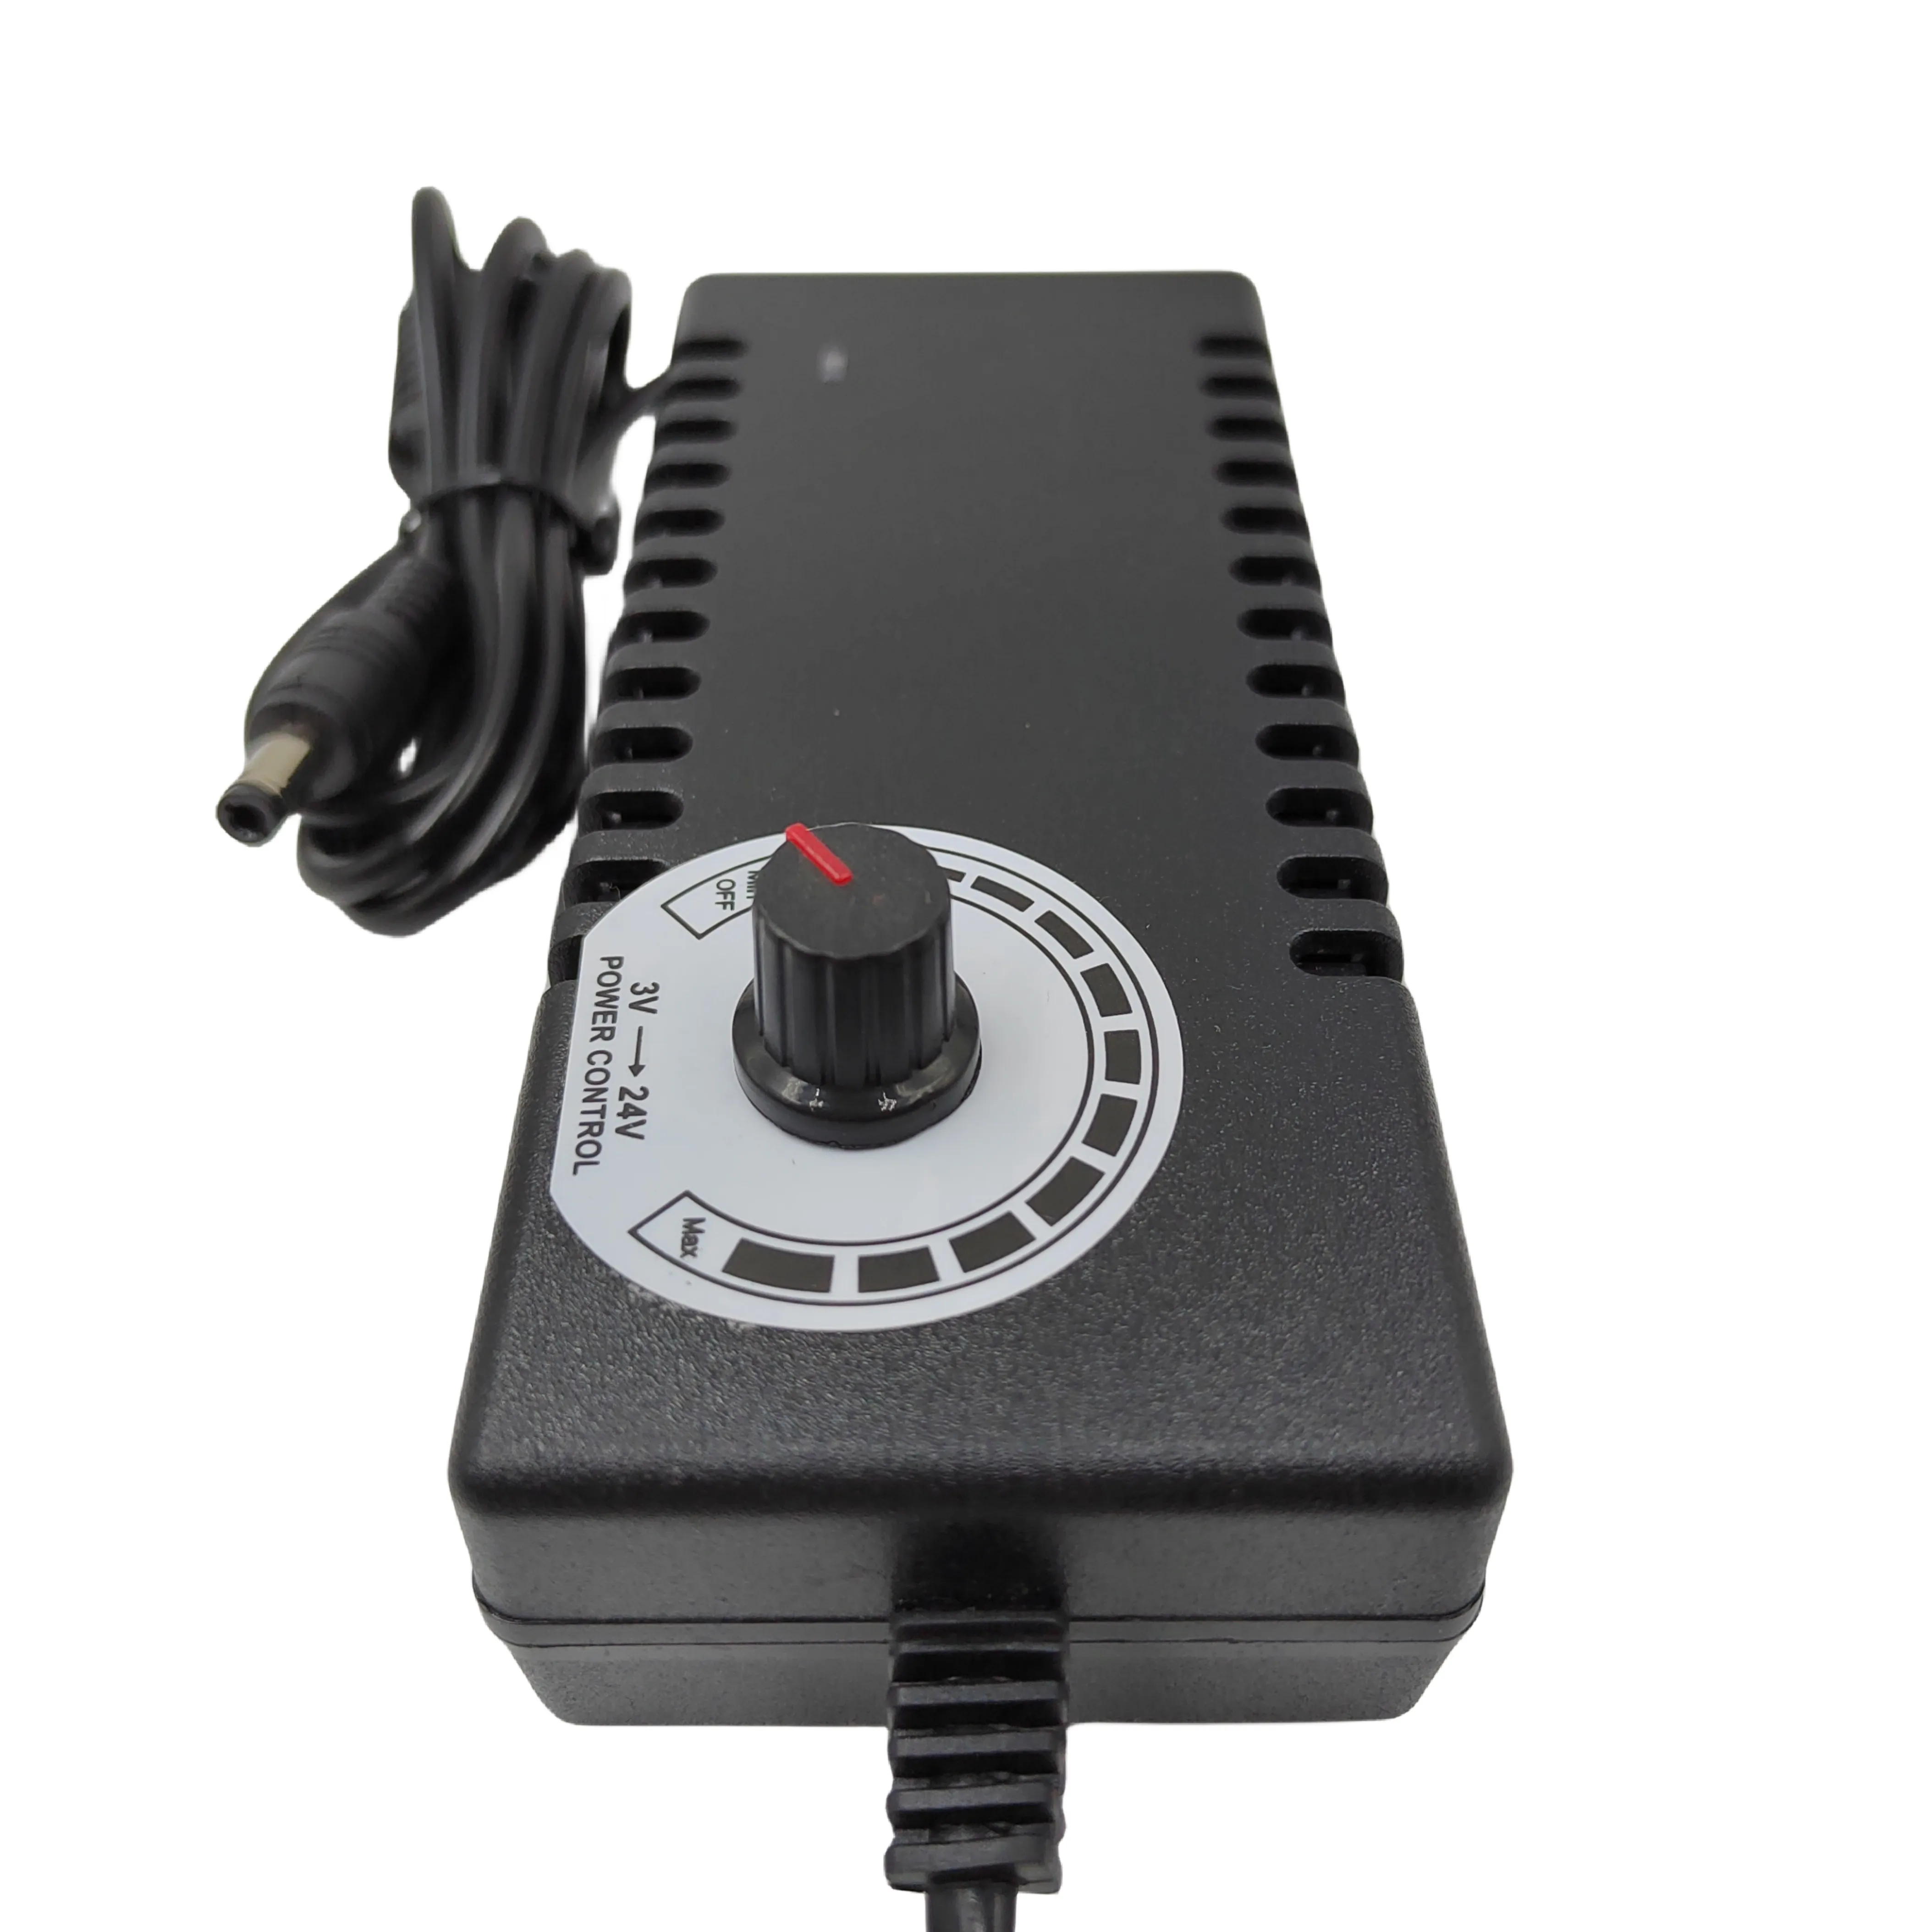 3-12v5a adjustable voltage power adapter Water pump blower gun dimming speed control temperature control adapter 3-12V5A